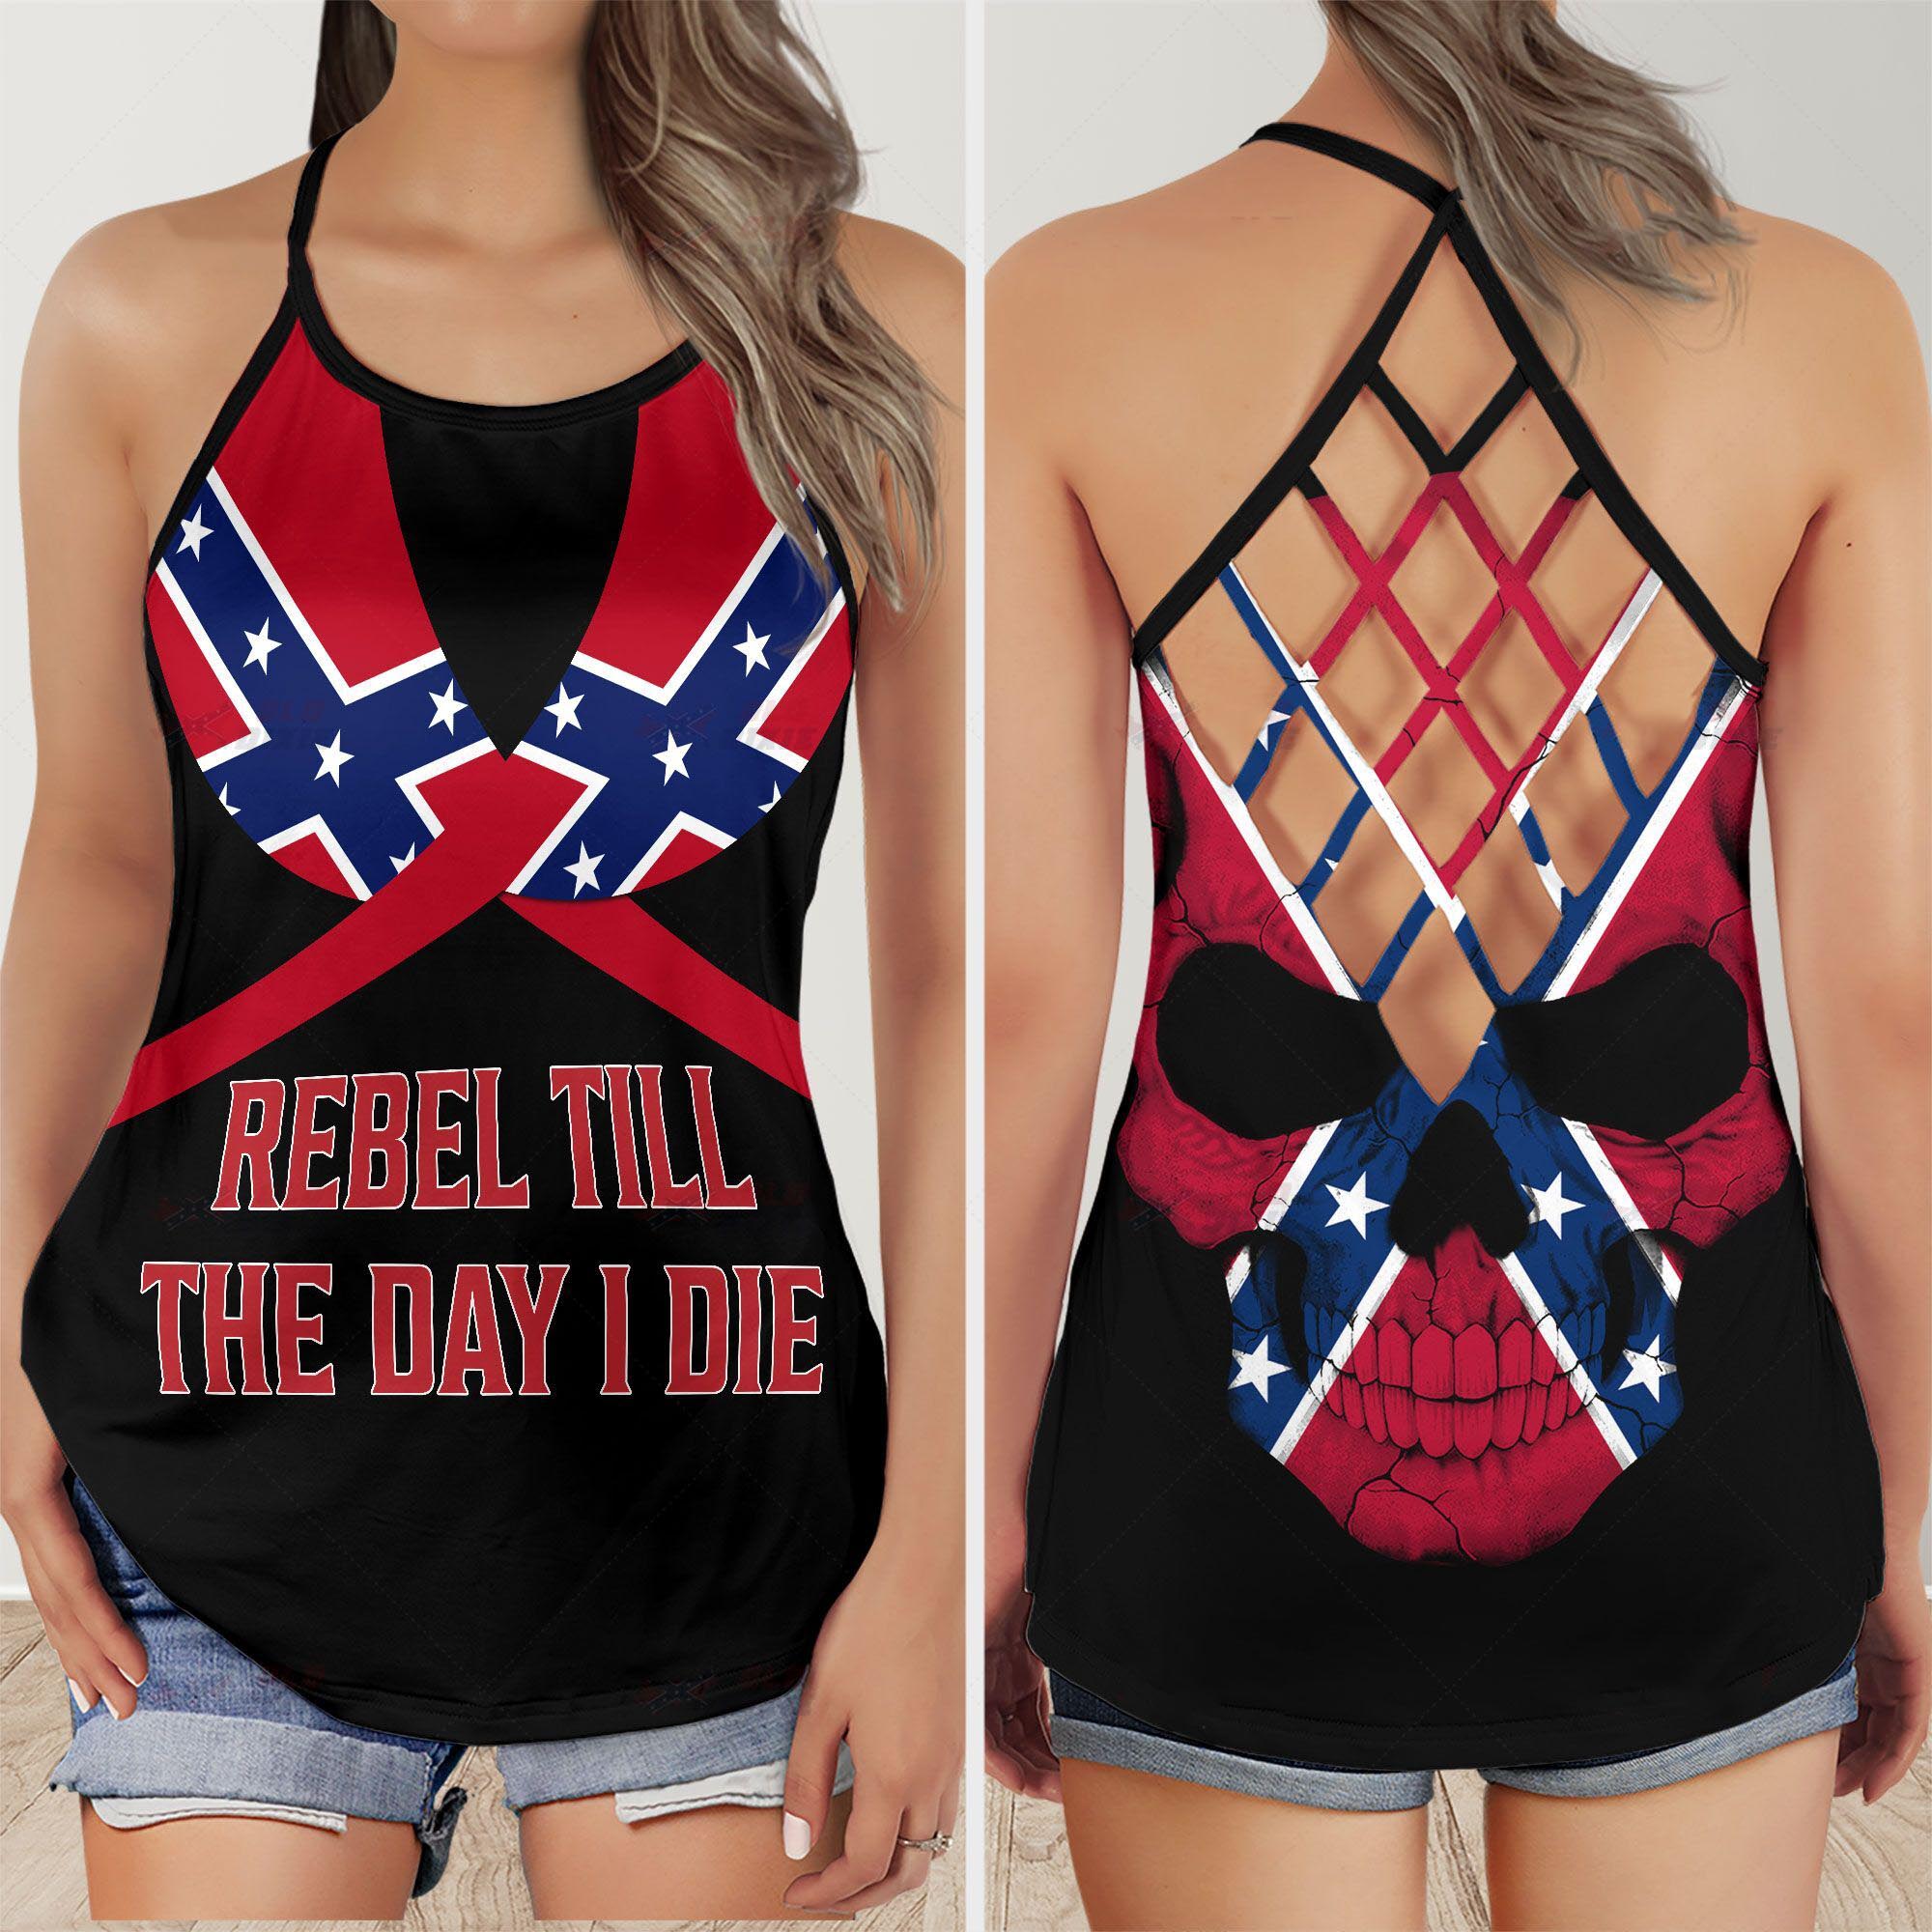 Southern Confederate Flag Skull Rebel till the day I die criss cross tank top – Saleoff 080921